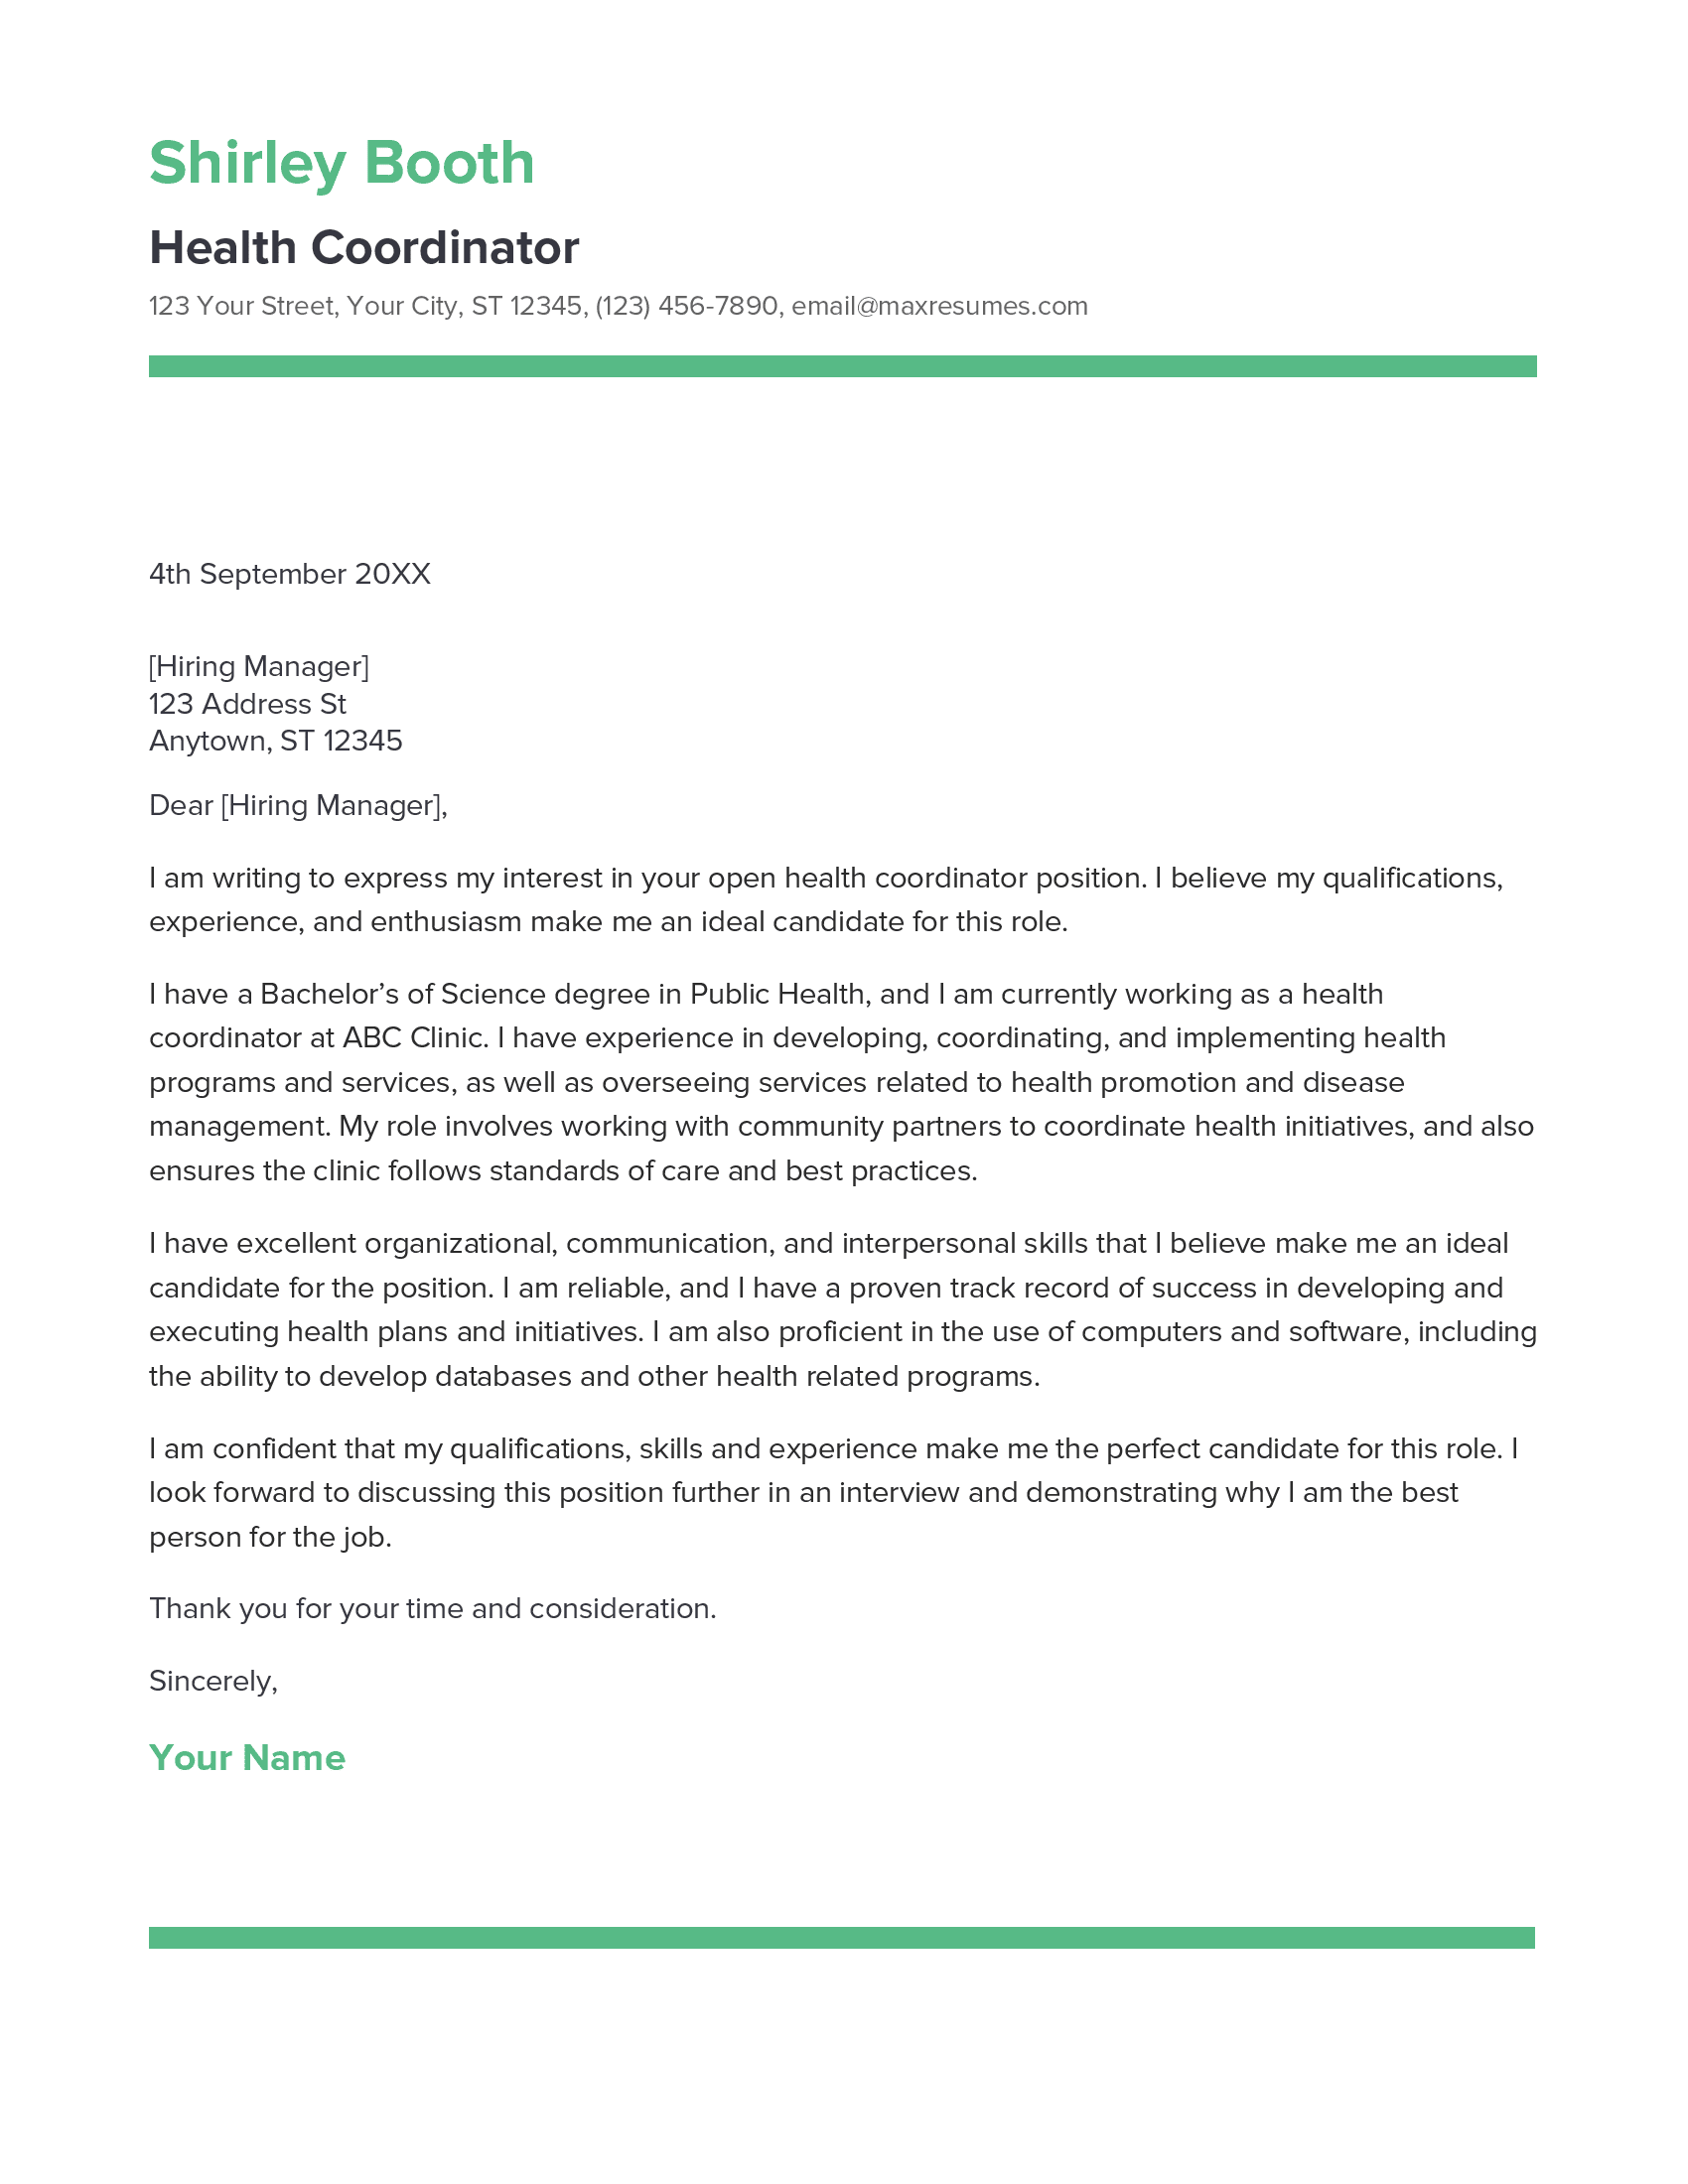 Health Coordinator Cover Letter Example